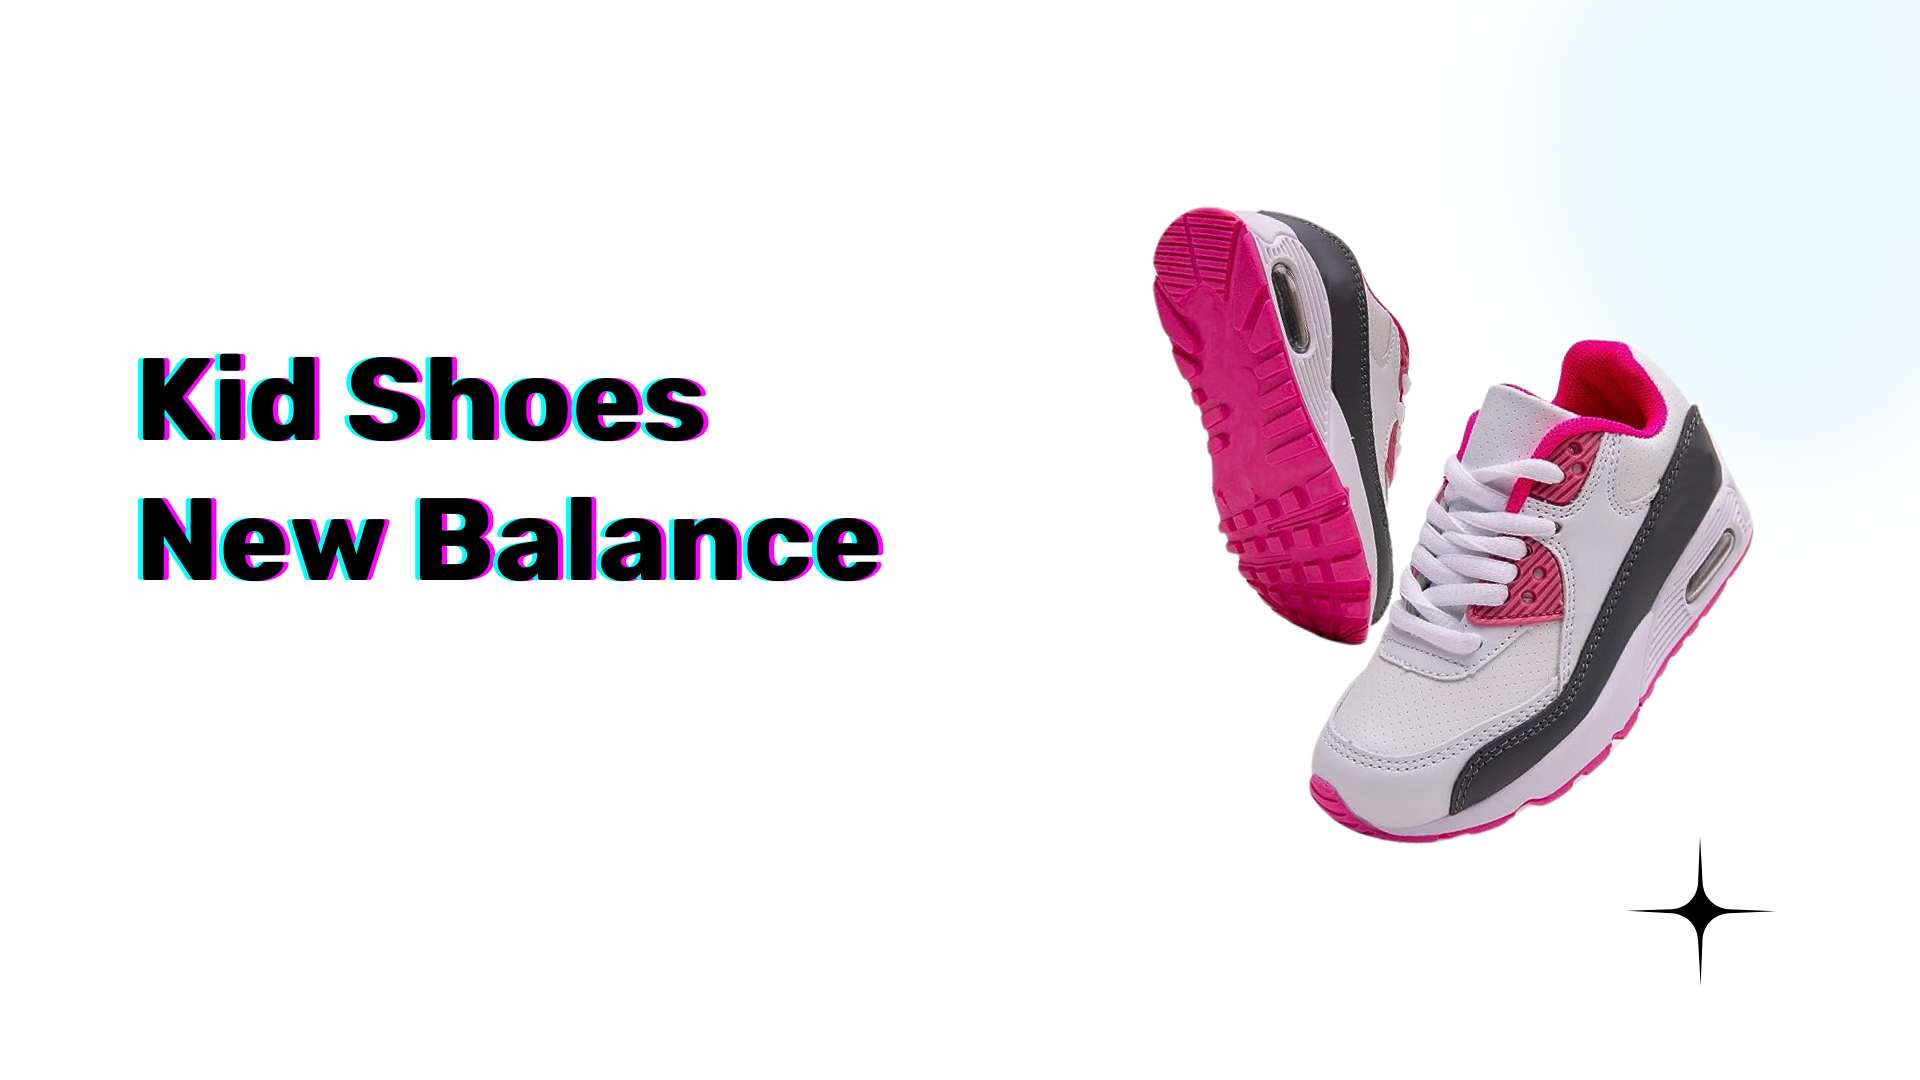 Kid Shoes New Balance: Stepping into Comfort and Style